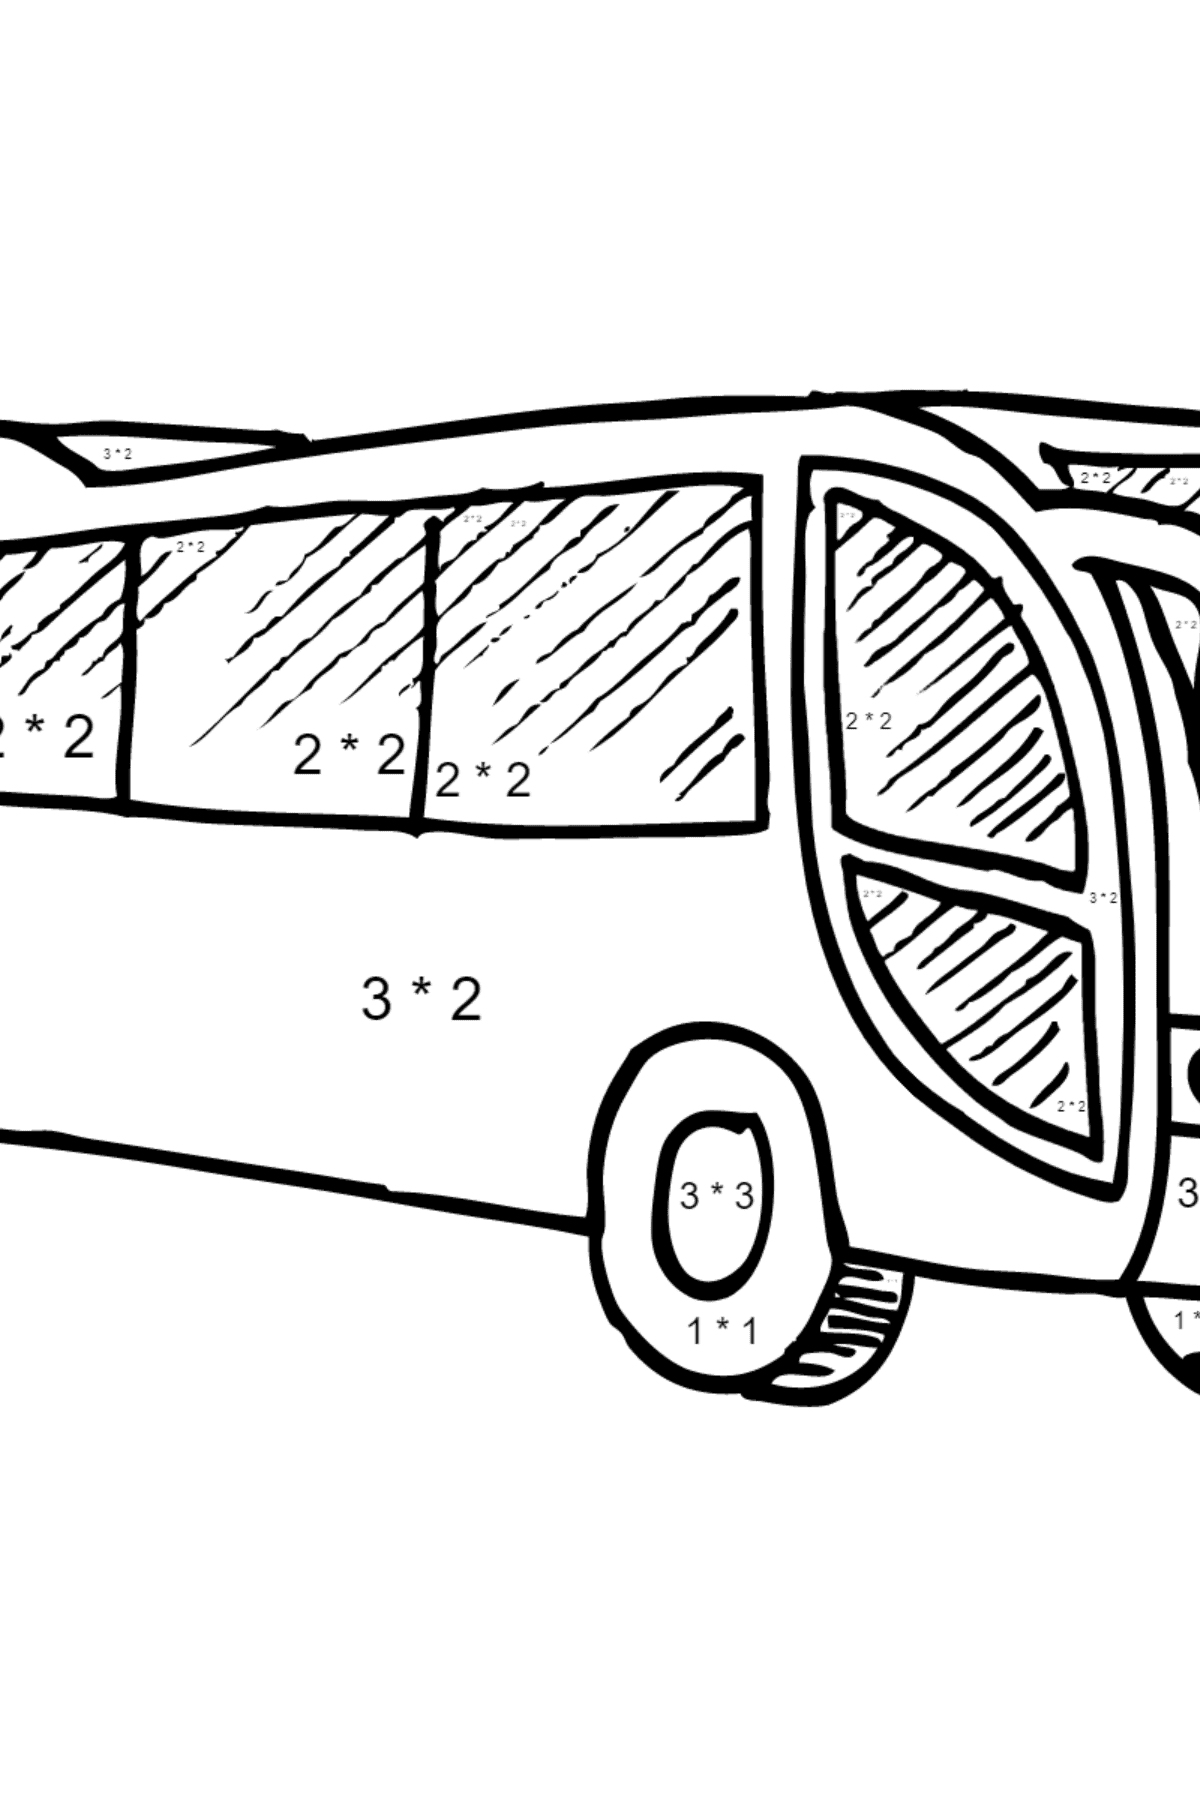 Coloring Page - A Bus is Having Rest - Math Coloring - Multiplication for Children